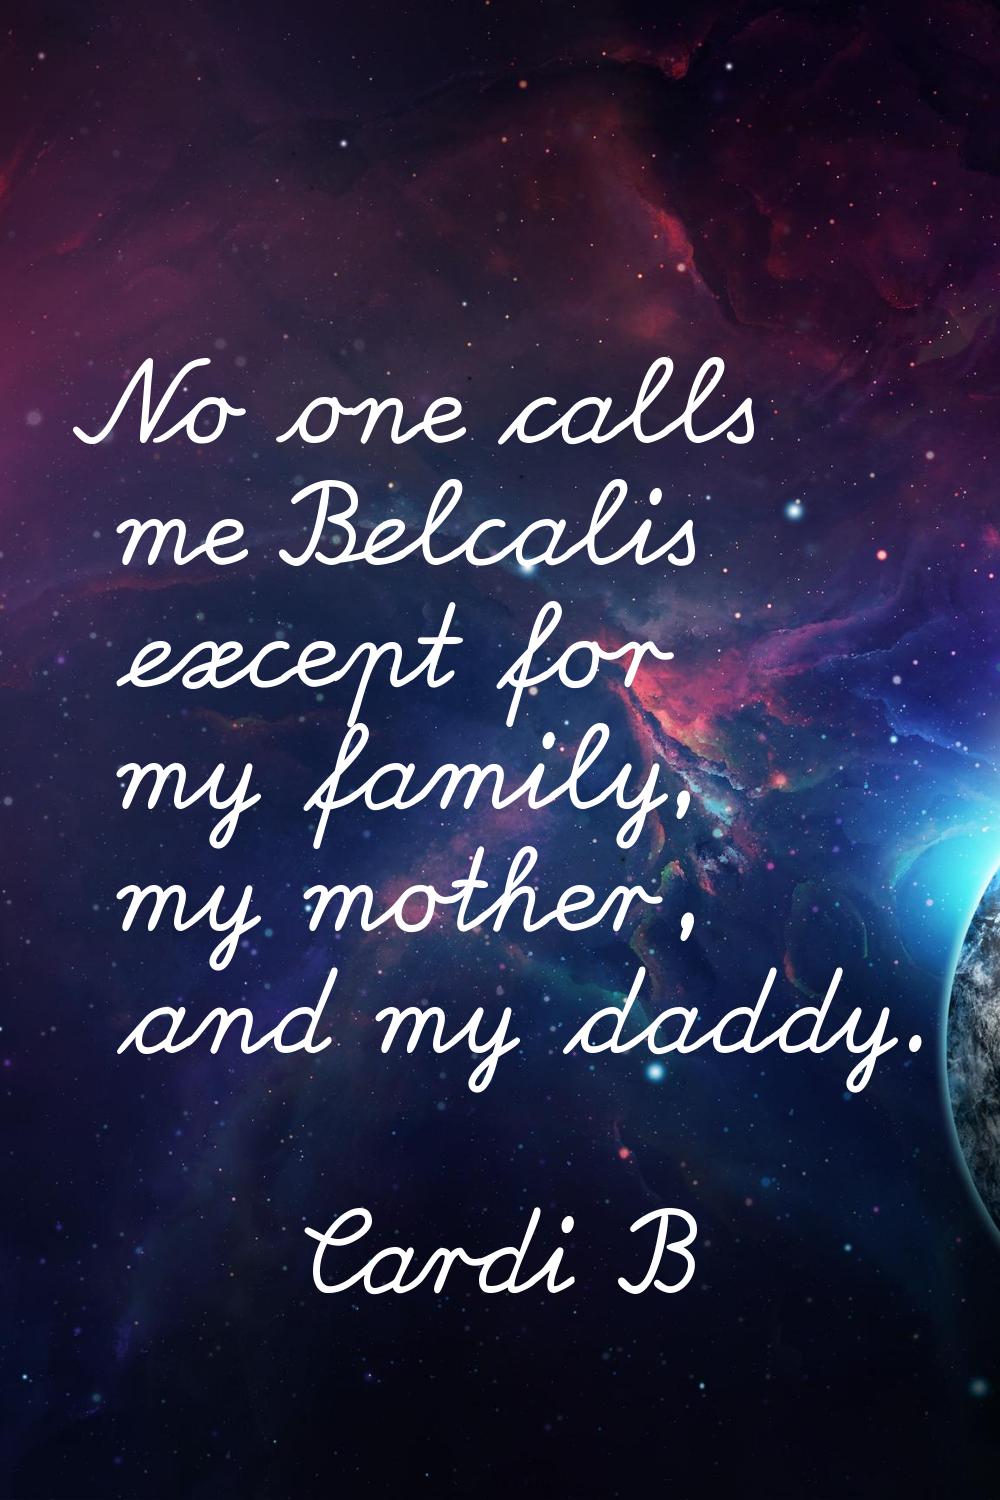 No one calls me Belcalis except for my family, my mother, and my daddy.